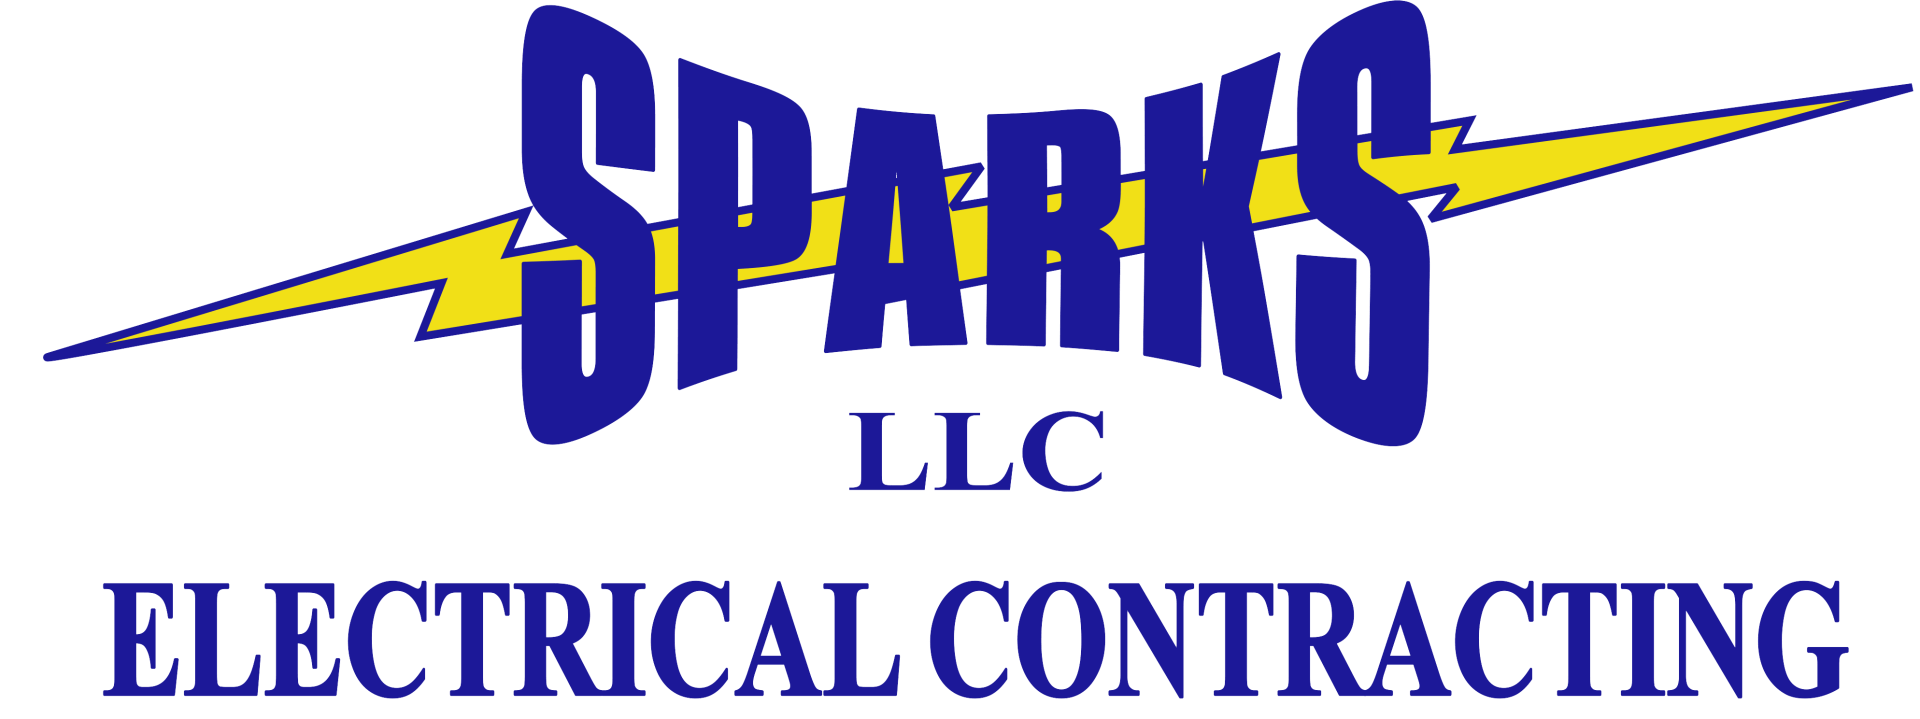 sparks electrical contracting logo